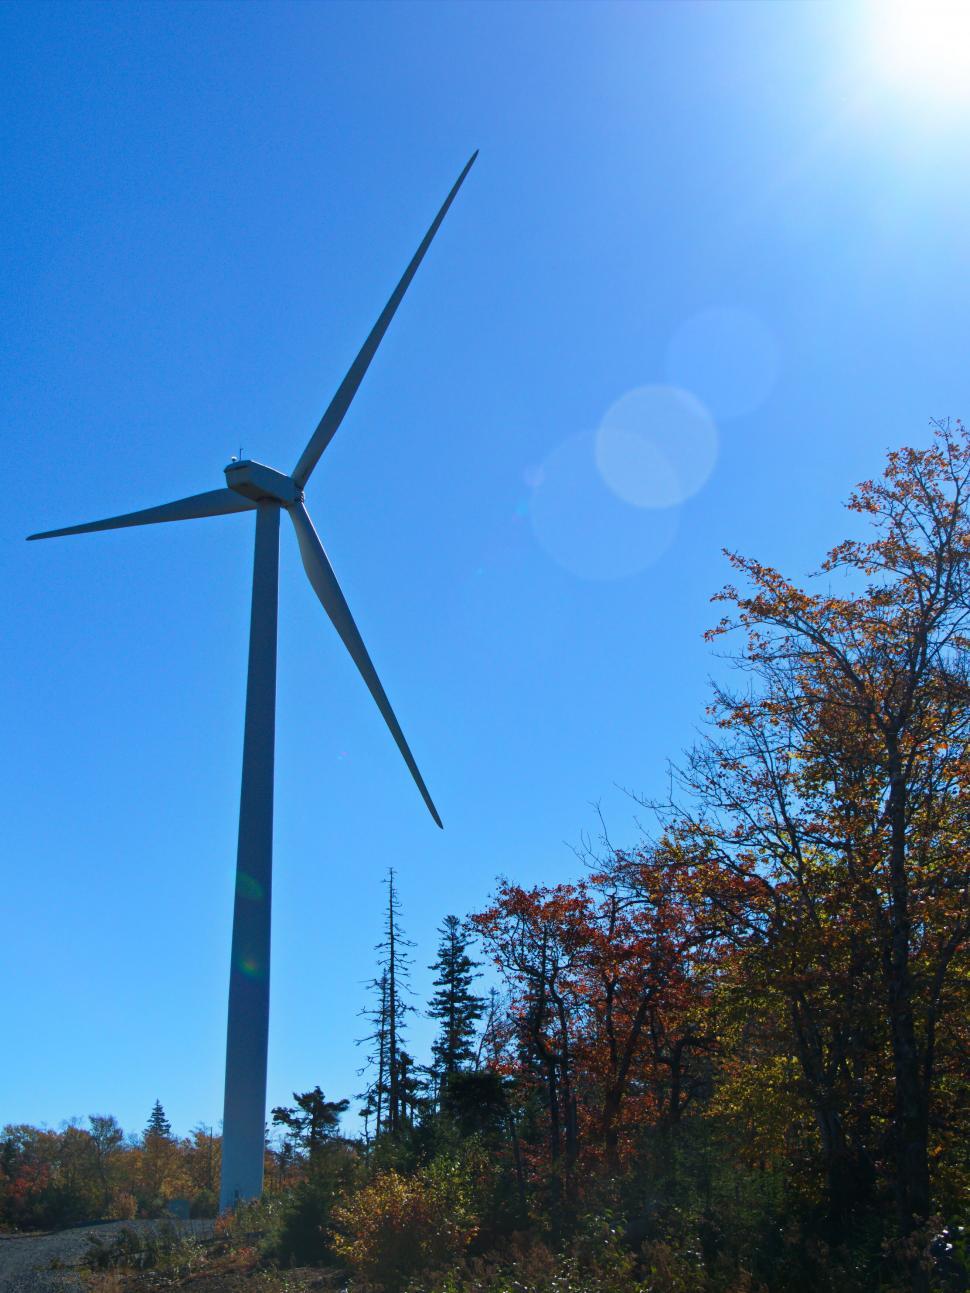 Free Image of Majestic Wind Turbine Against Clear Blue Sky 